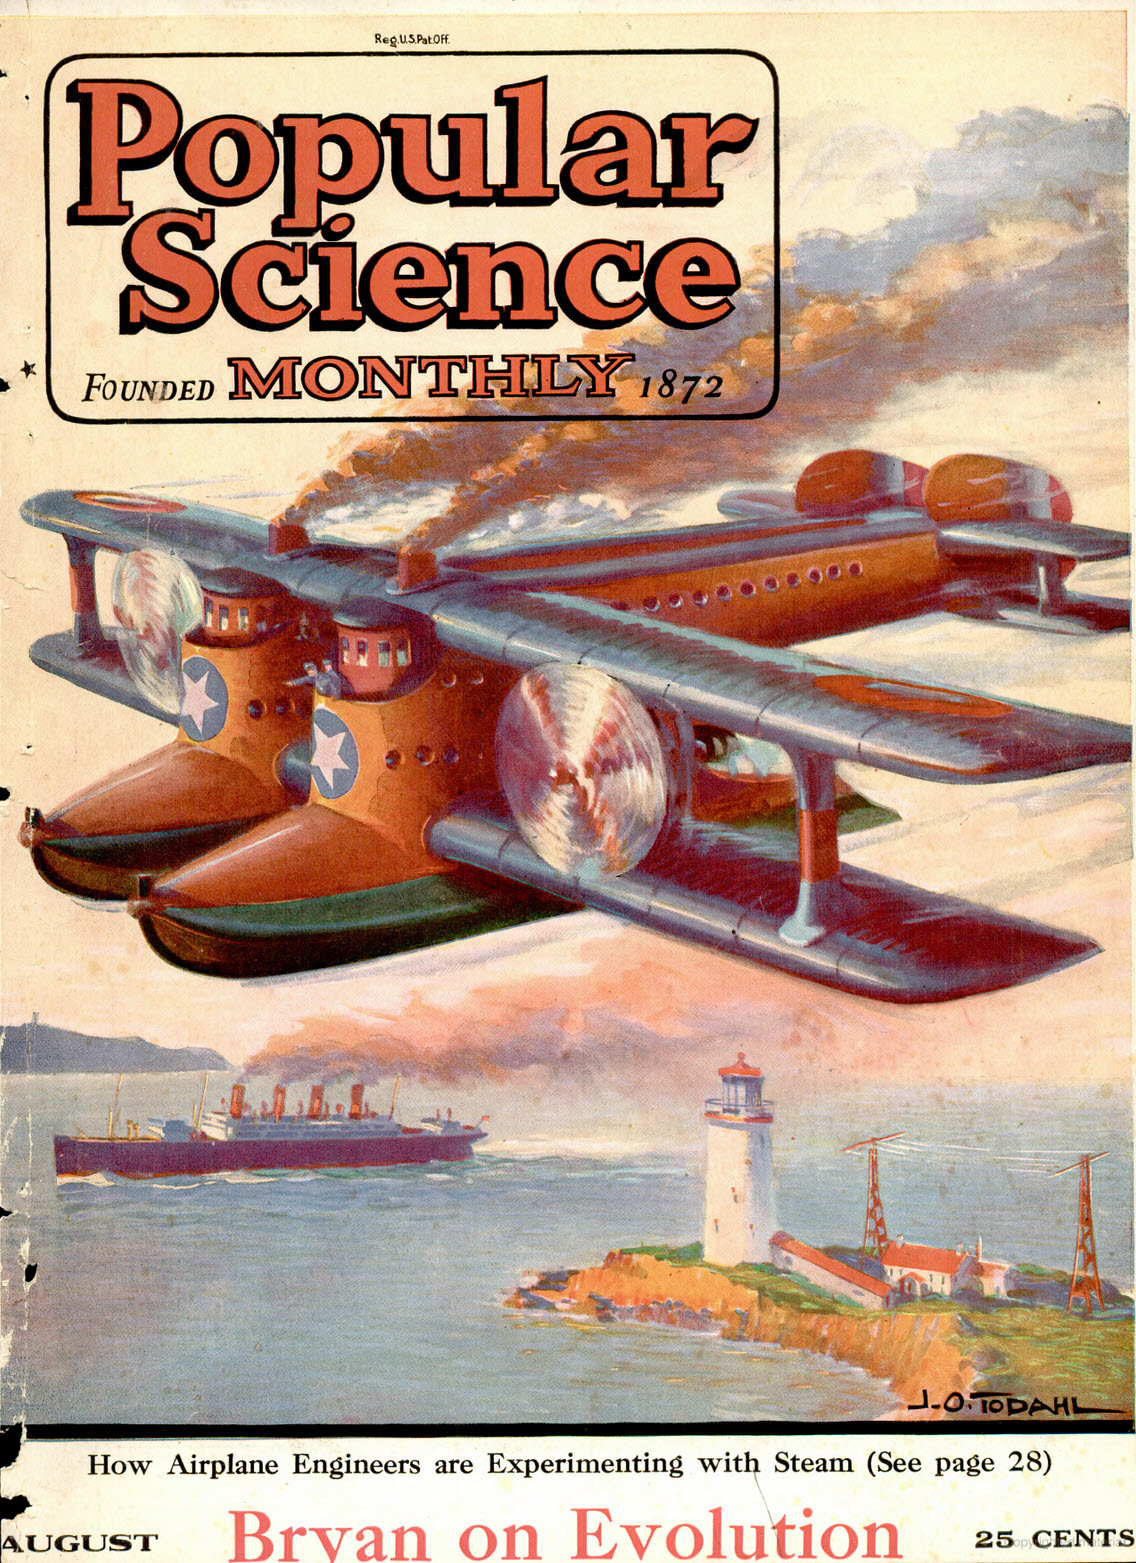 How Airplane Engineers are Experimenting with Steam, Popular Science Monthly, August 1923.jpg